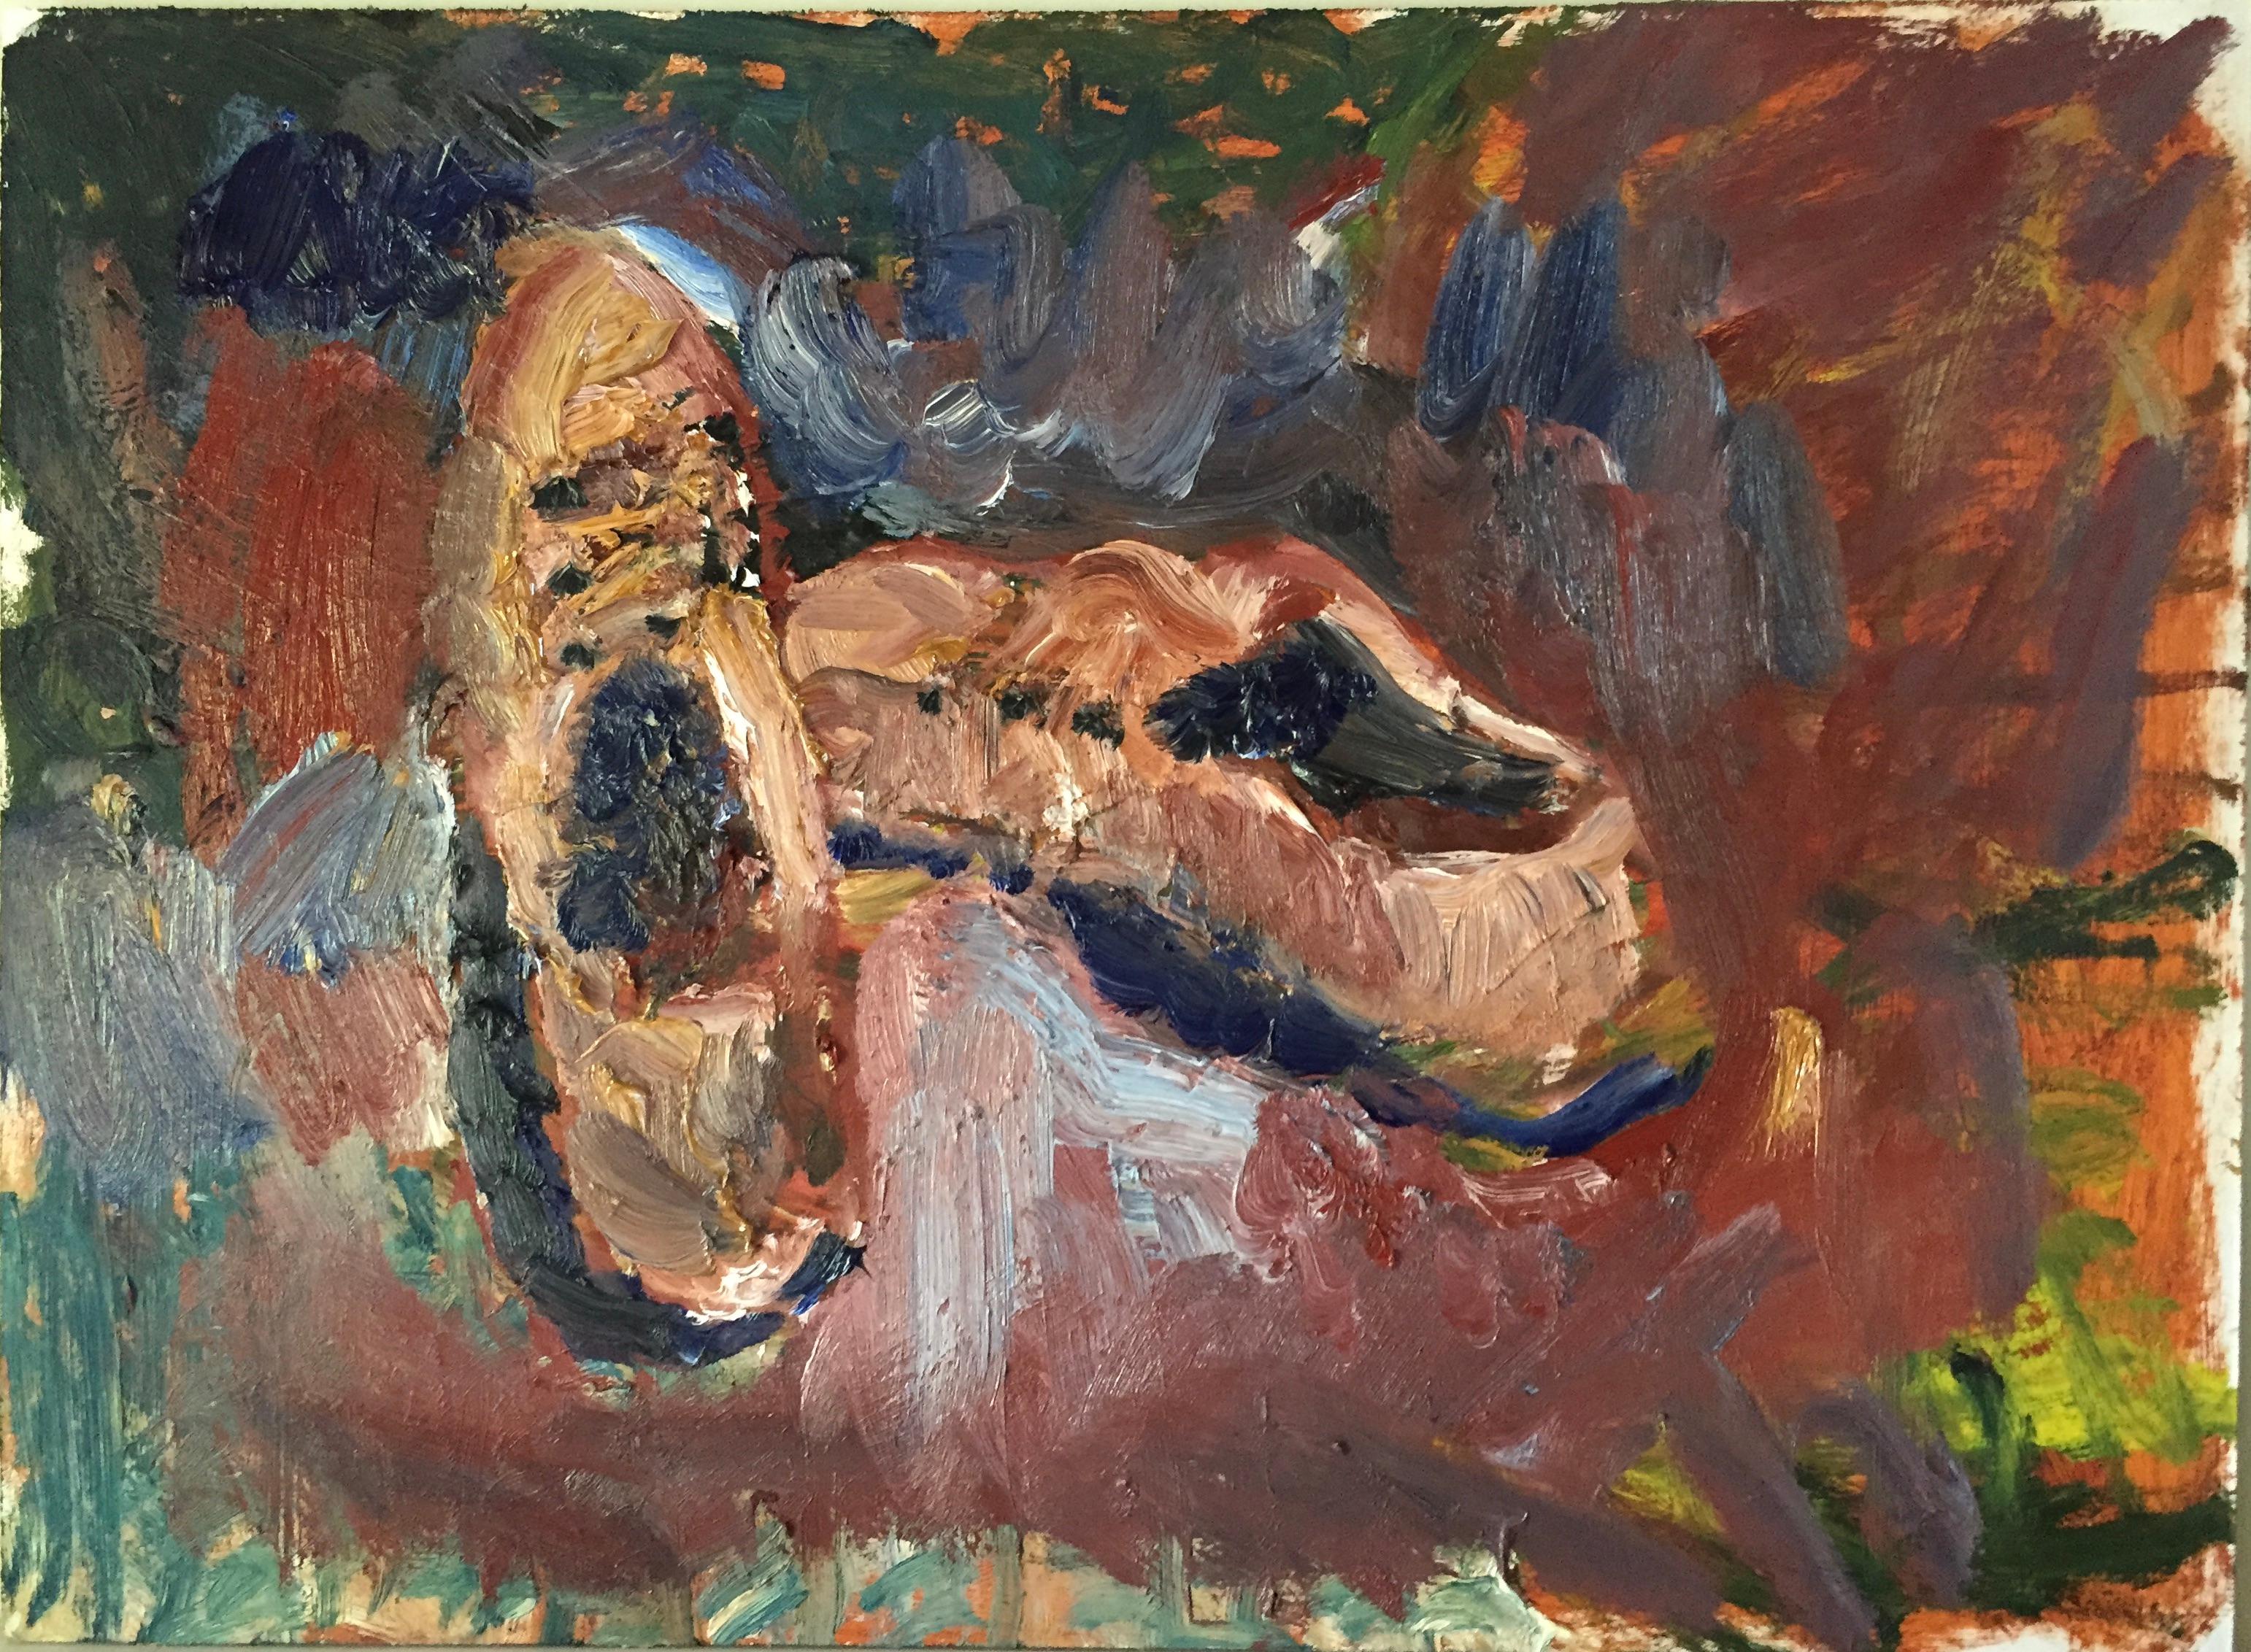 ZEBEDEE JONES Abstract Painting - 'A PAIR OF TRAINERS', 2020 Oil on board 42 x 57 cm Signed and dated verso